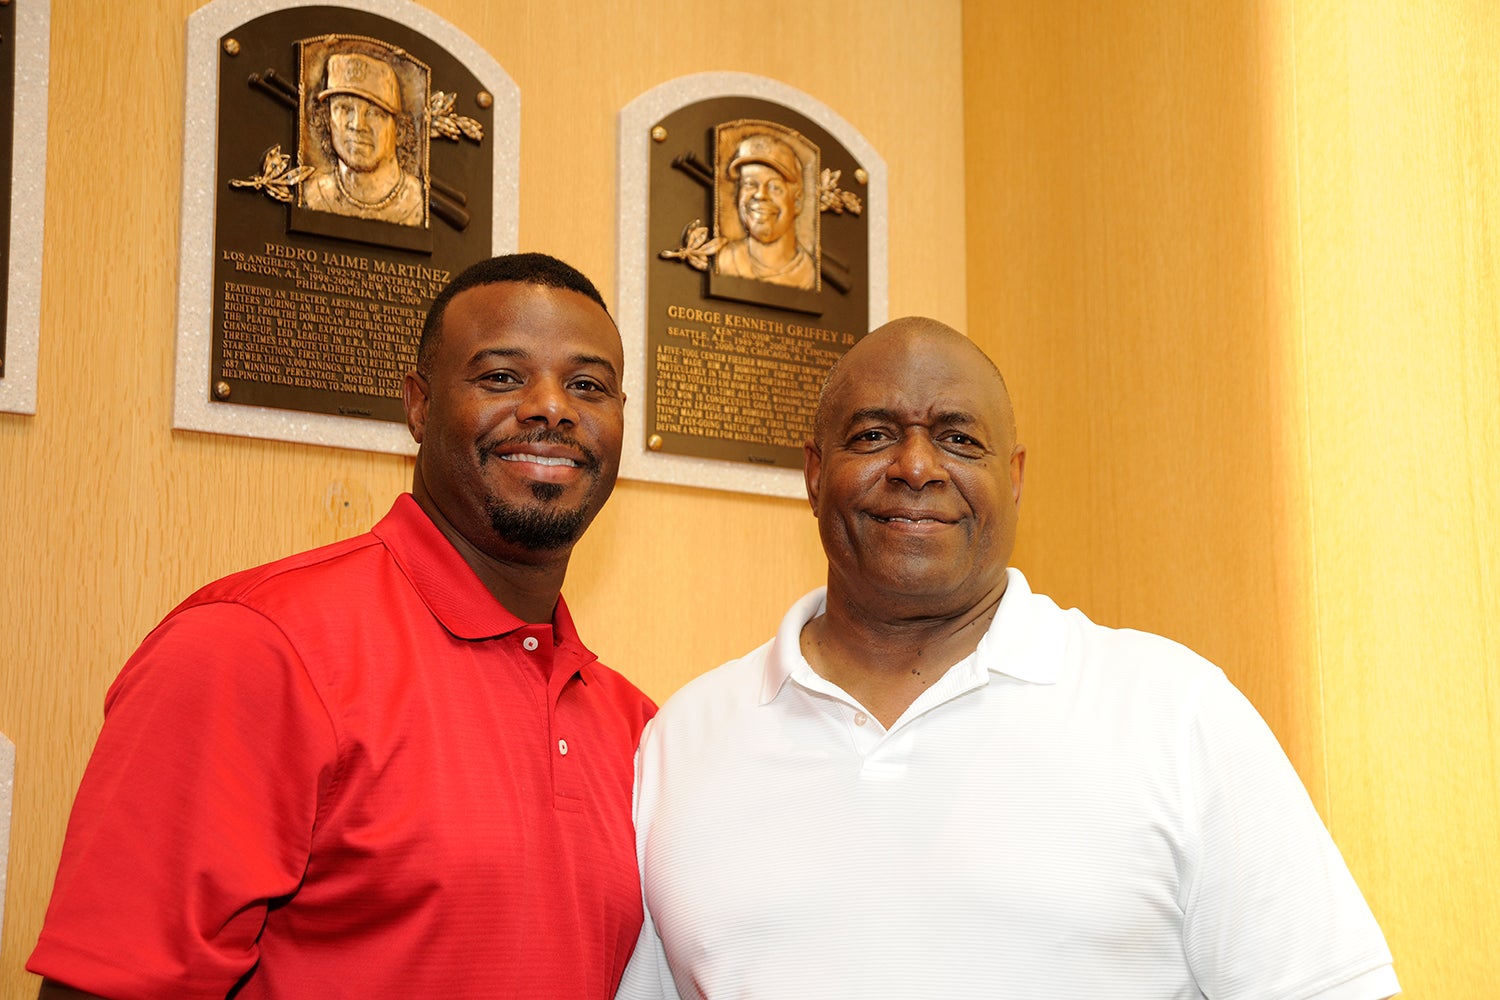 Ken Griffey Sr. and Jr. become first father/son combo to appear in the same lineup